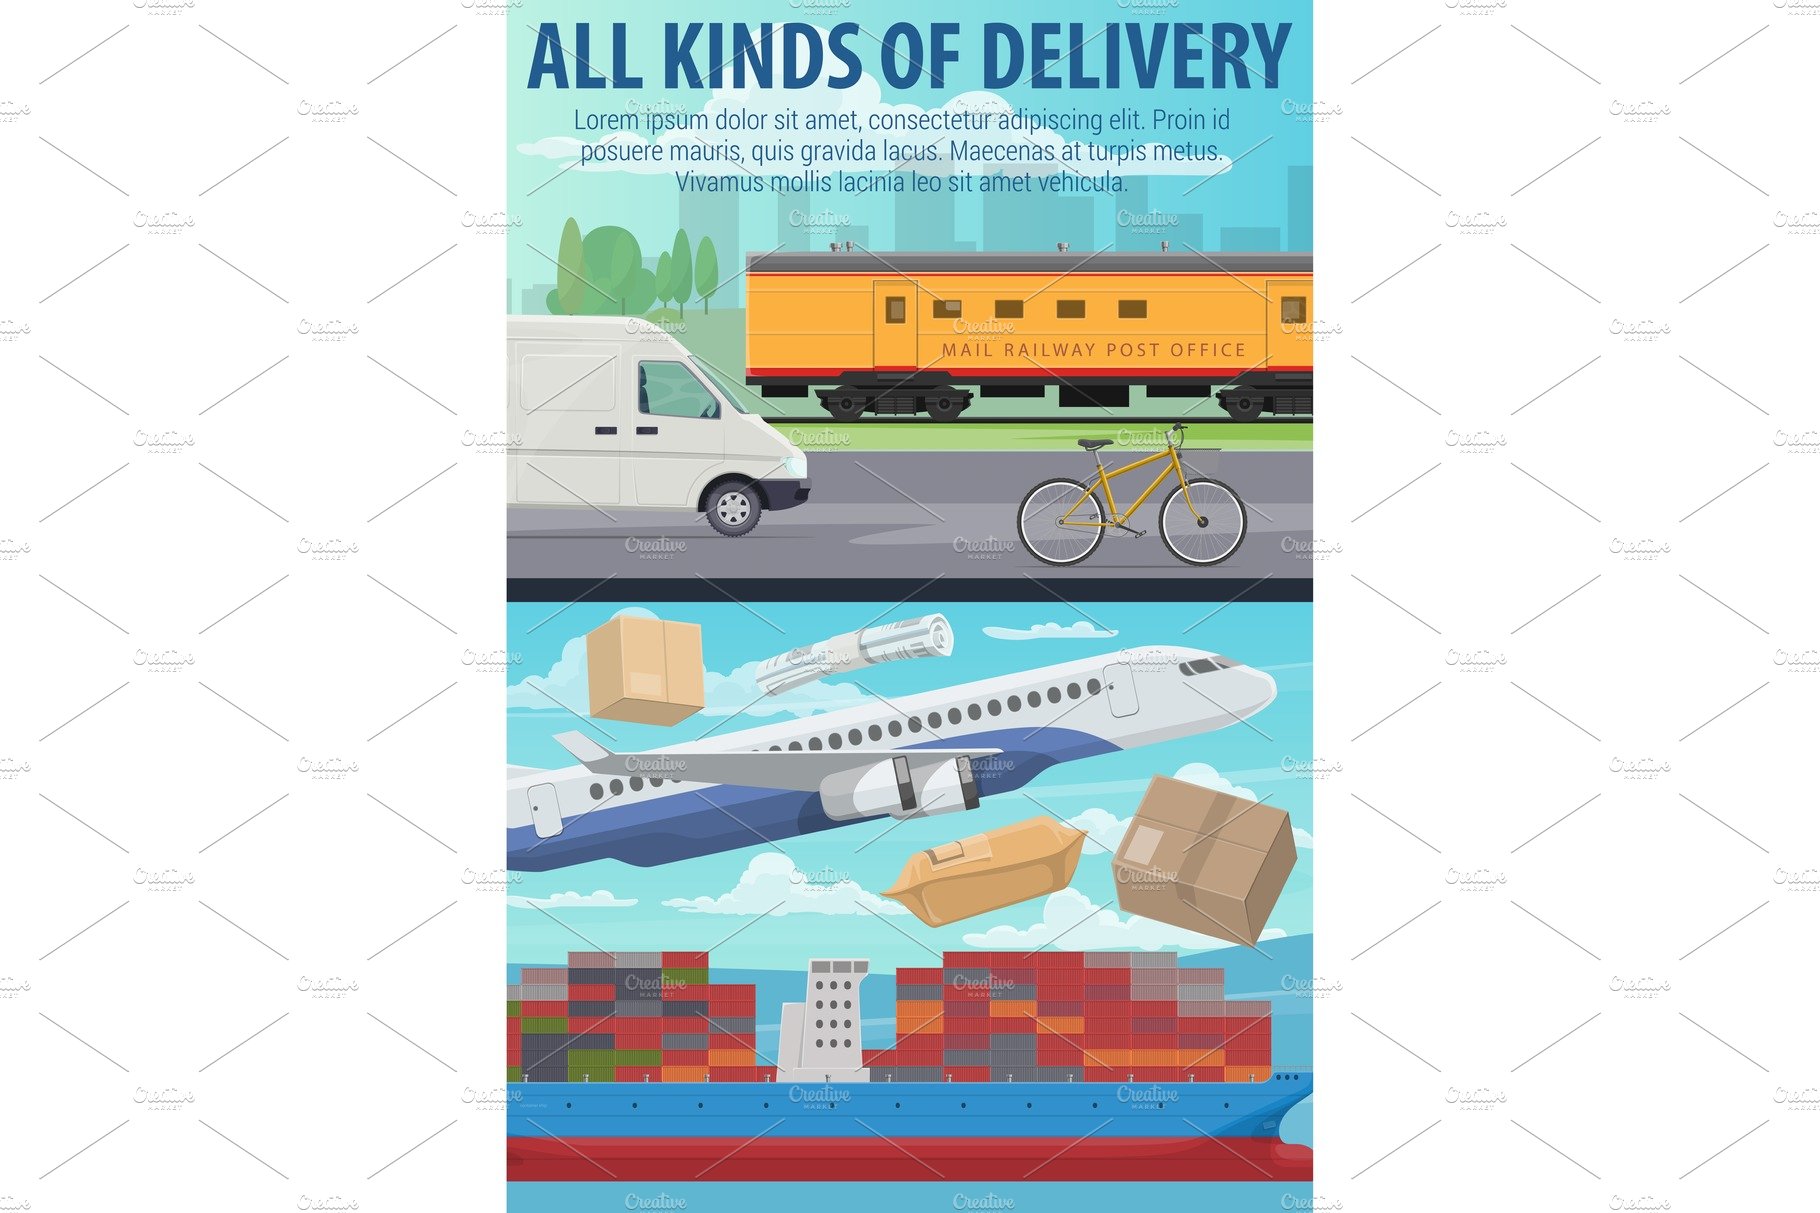 Mail delivery by plane, ship, train cover image.